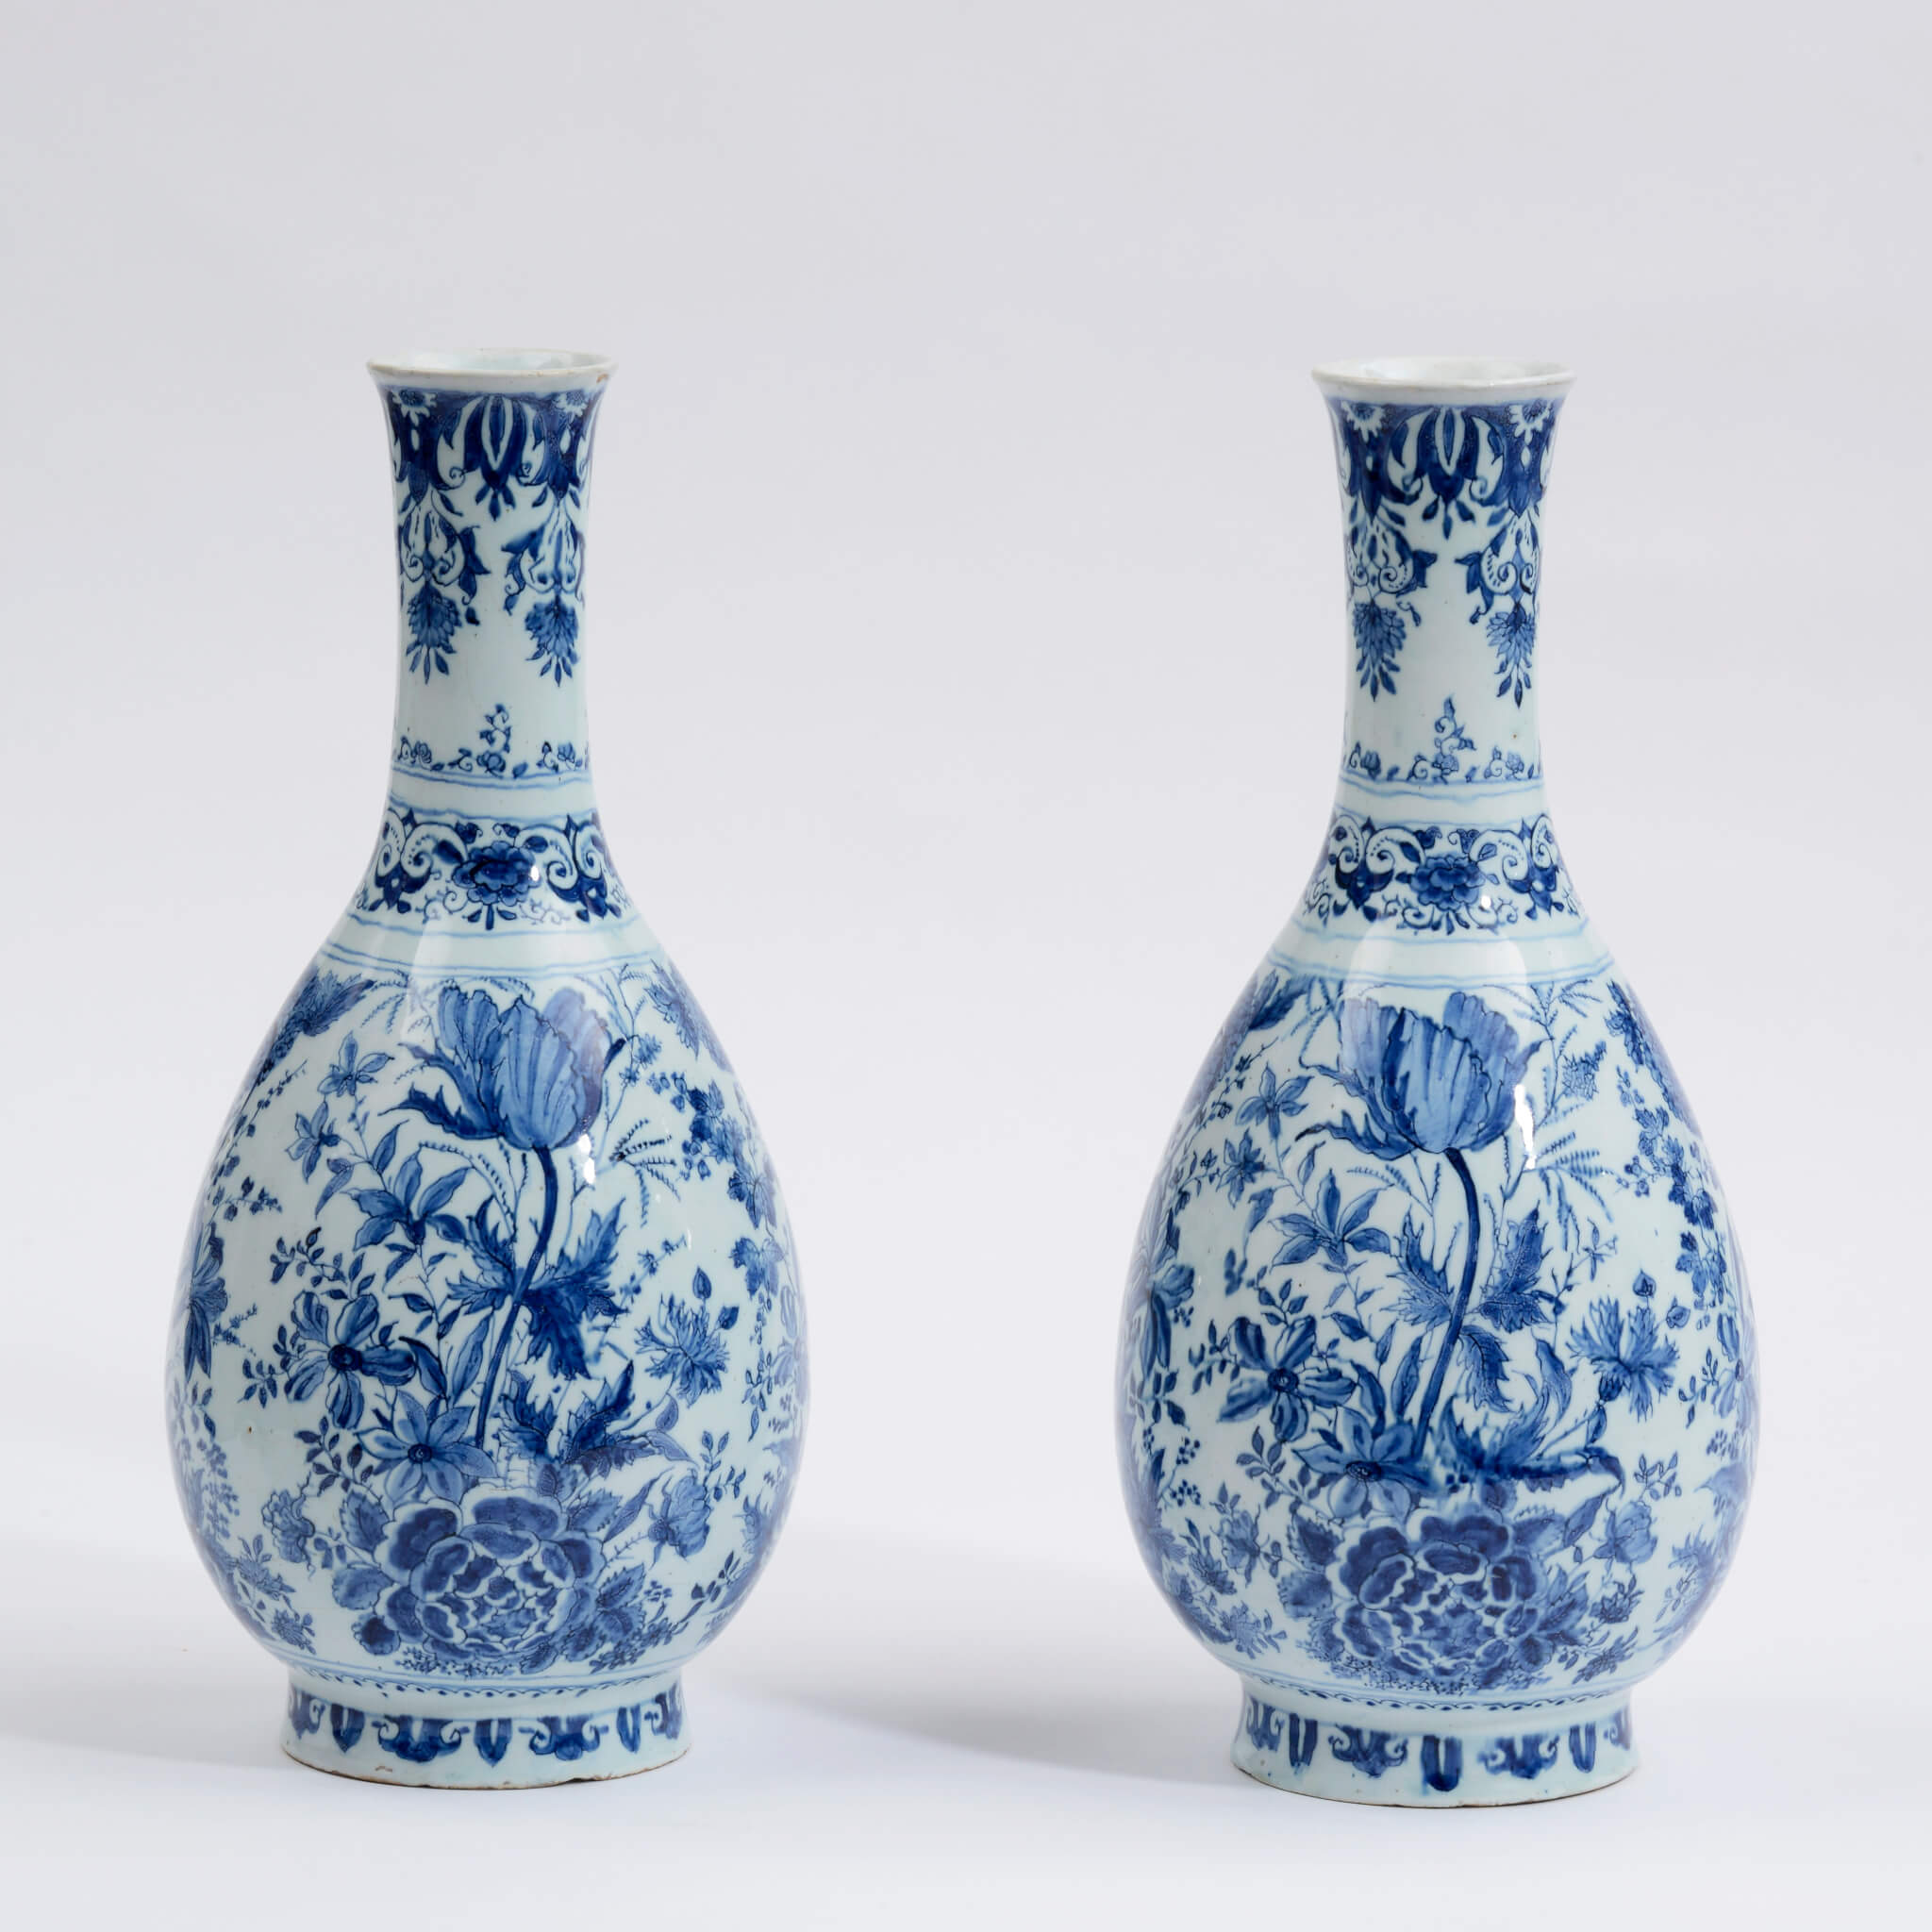 Pair of blue and white vases. Object no. 1899. Delftware